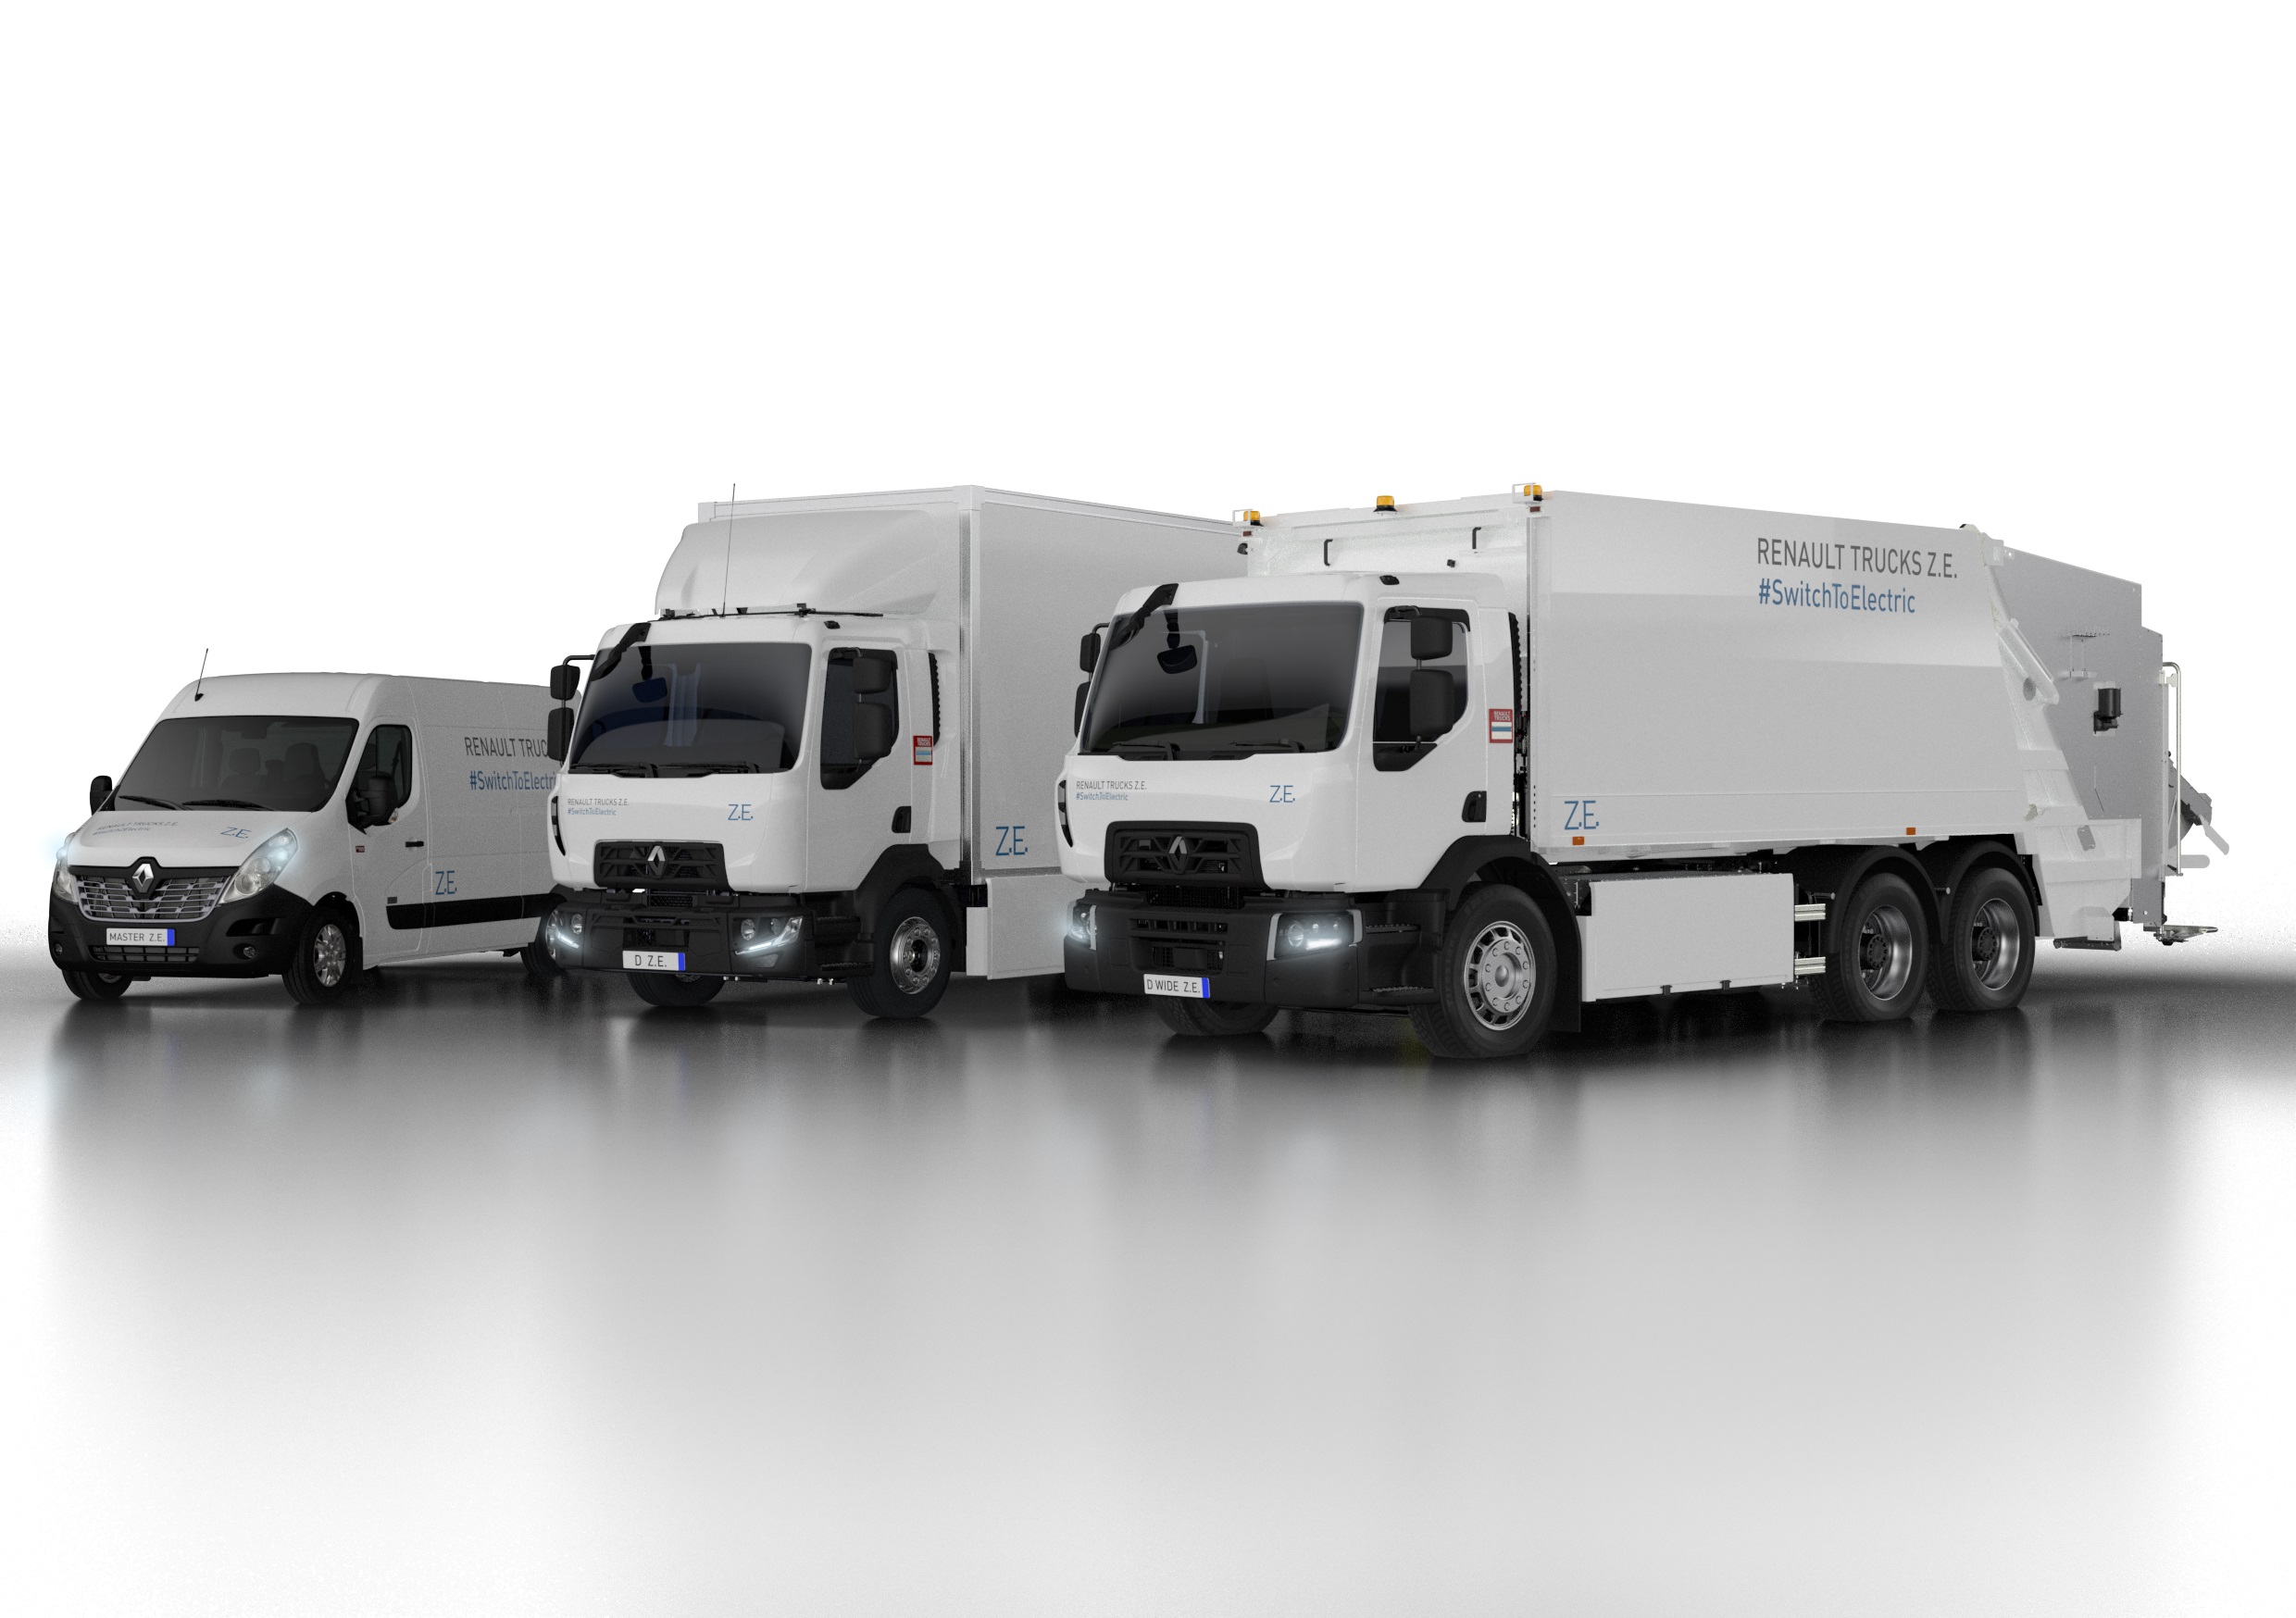 RENAULT TRUCKS UNVEILS ITS SECOND GENERATION OF ELECTRIC TRUCKS: A COMPLETE  Z.E. RANGE FROM 3.1 TO 26T